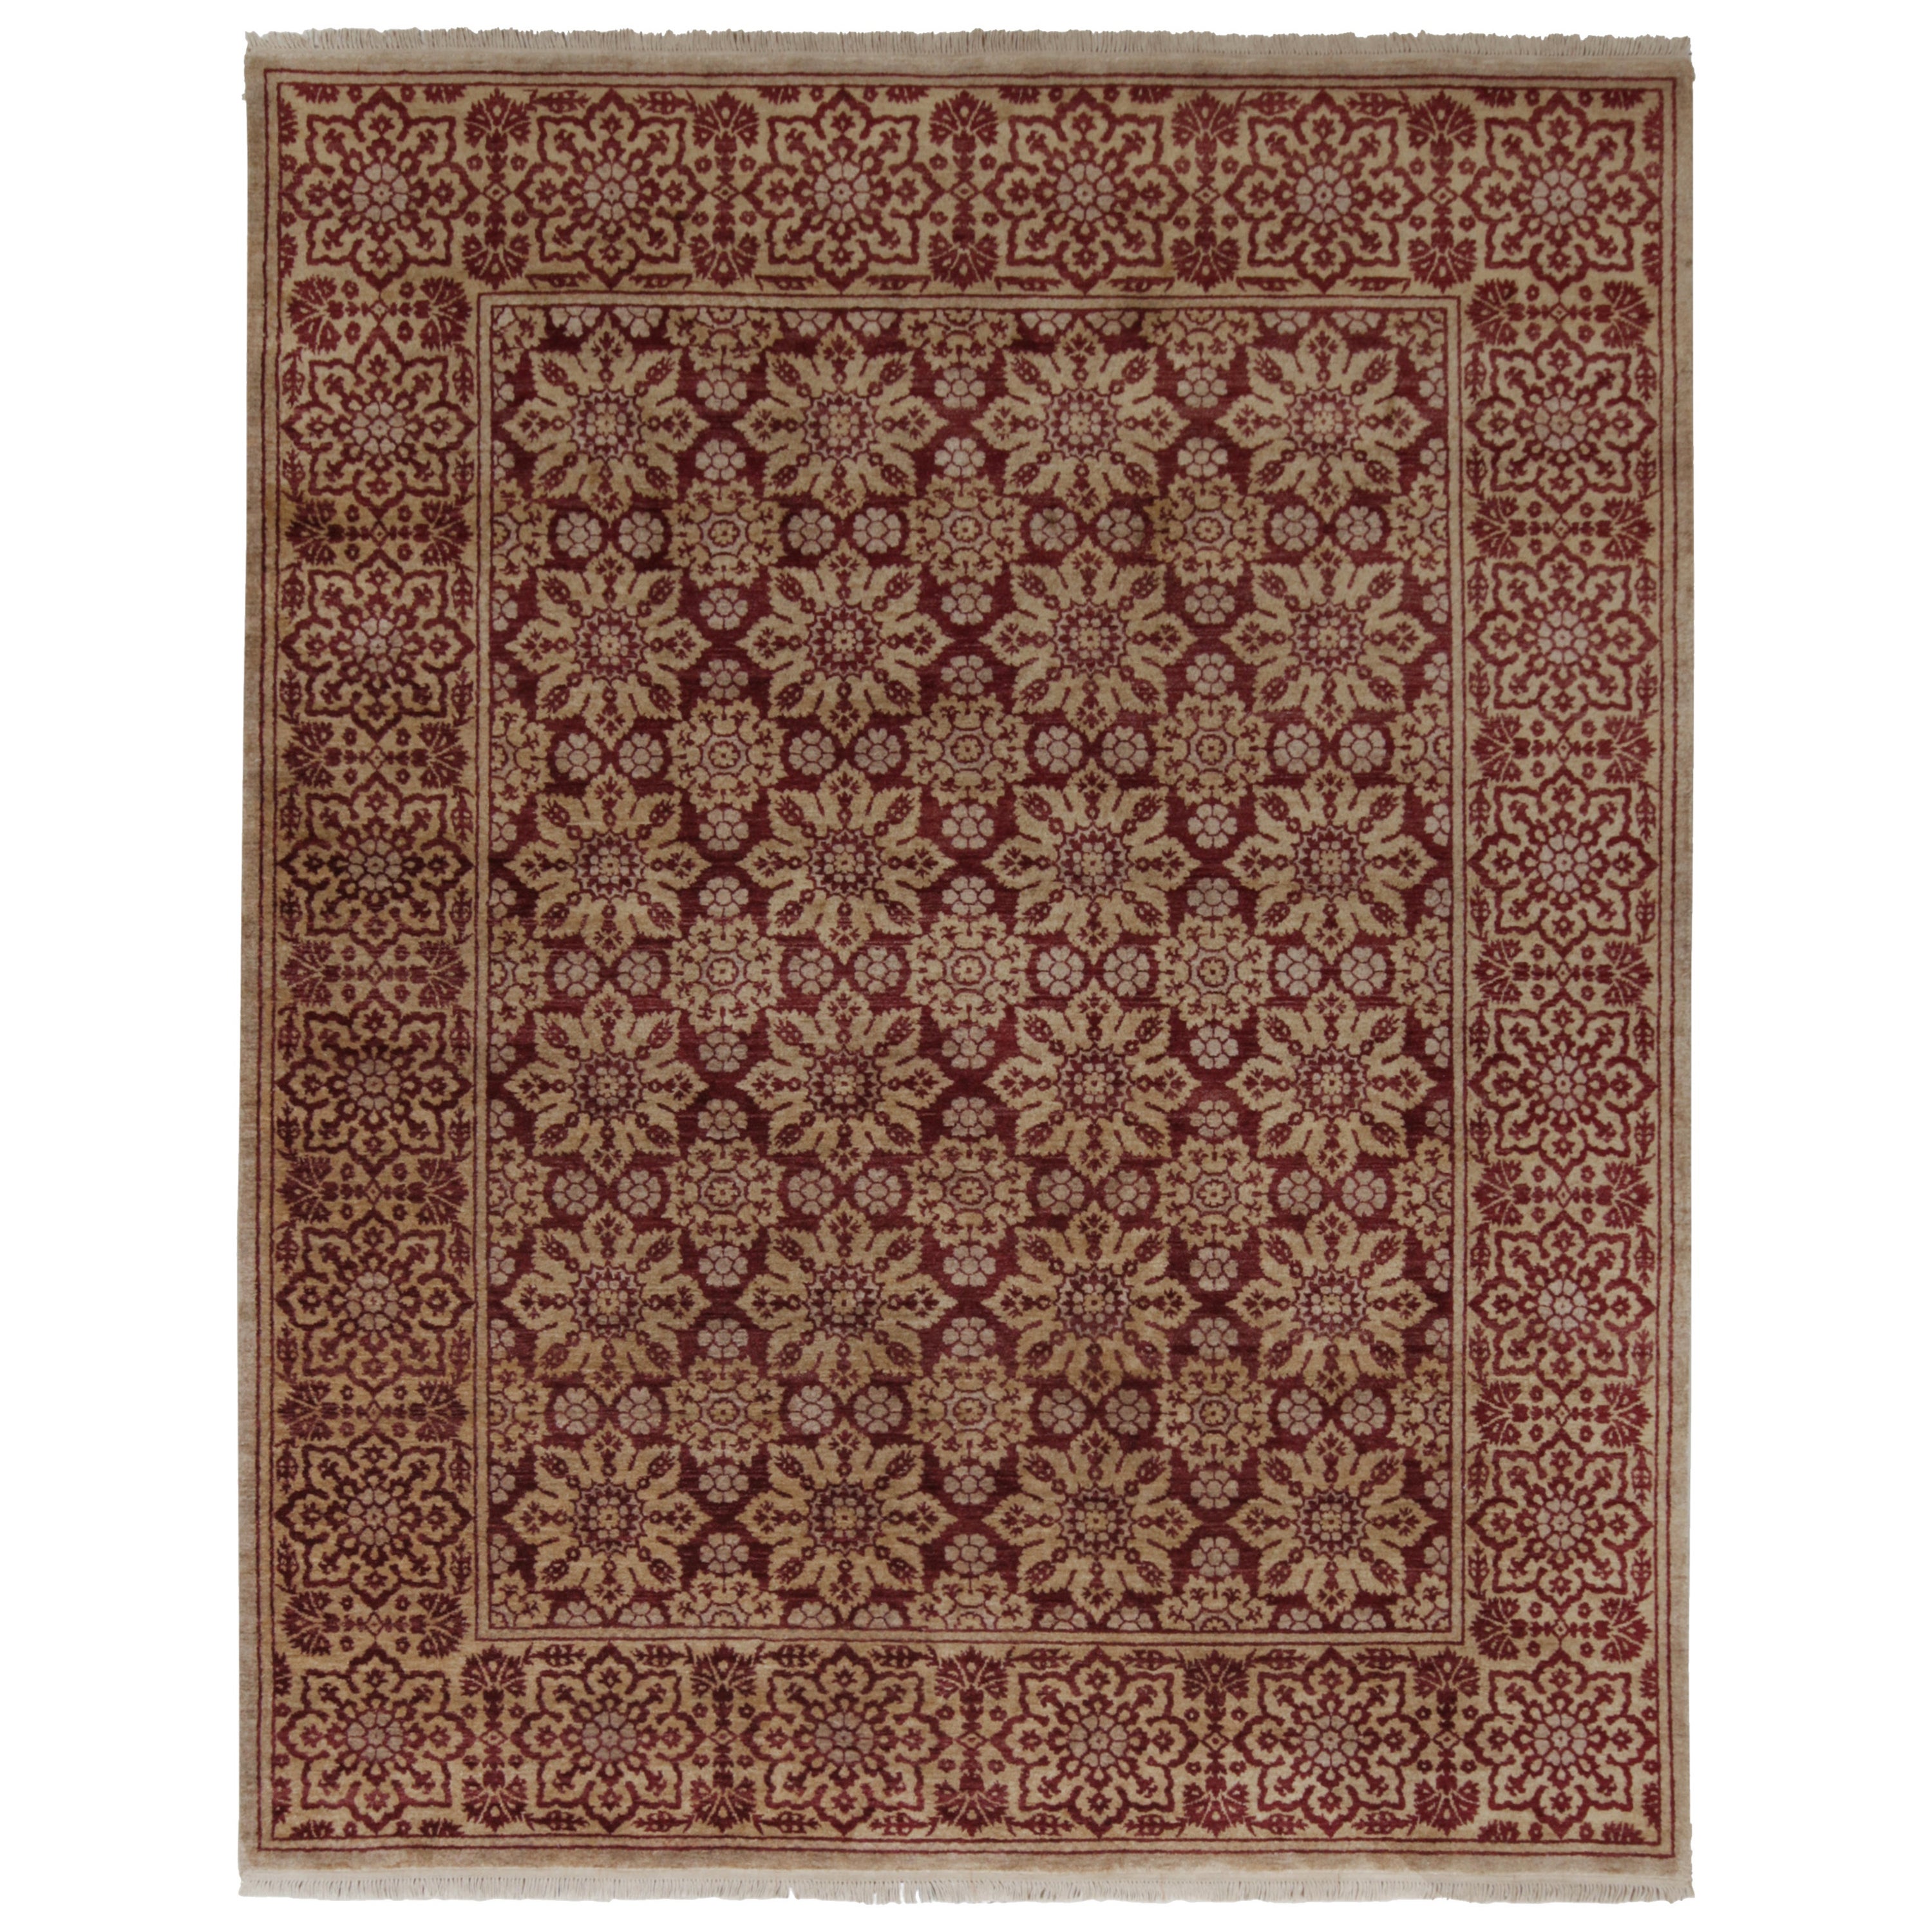 Rug & Kilim’s European Style Rug with Maroon & Gold Floral Pattern For Sale